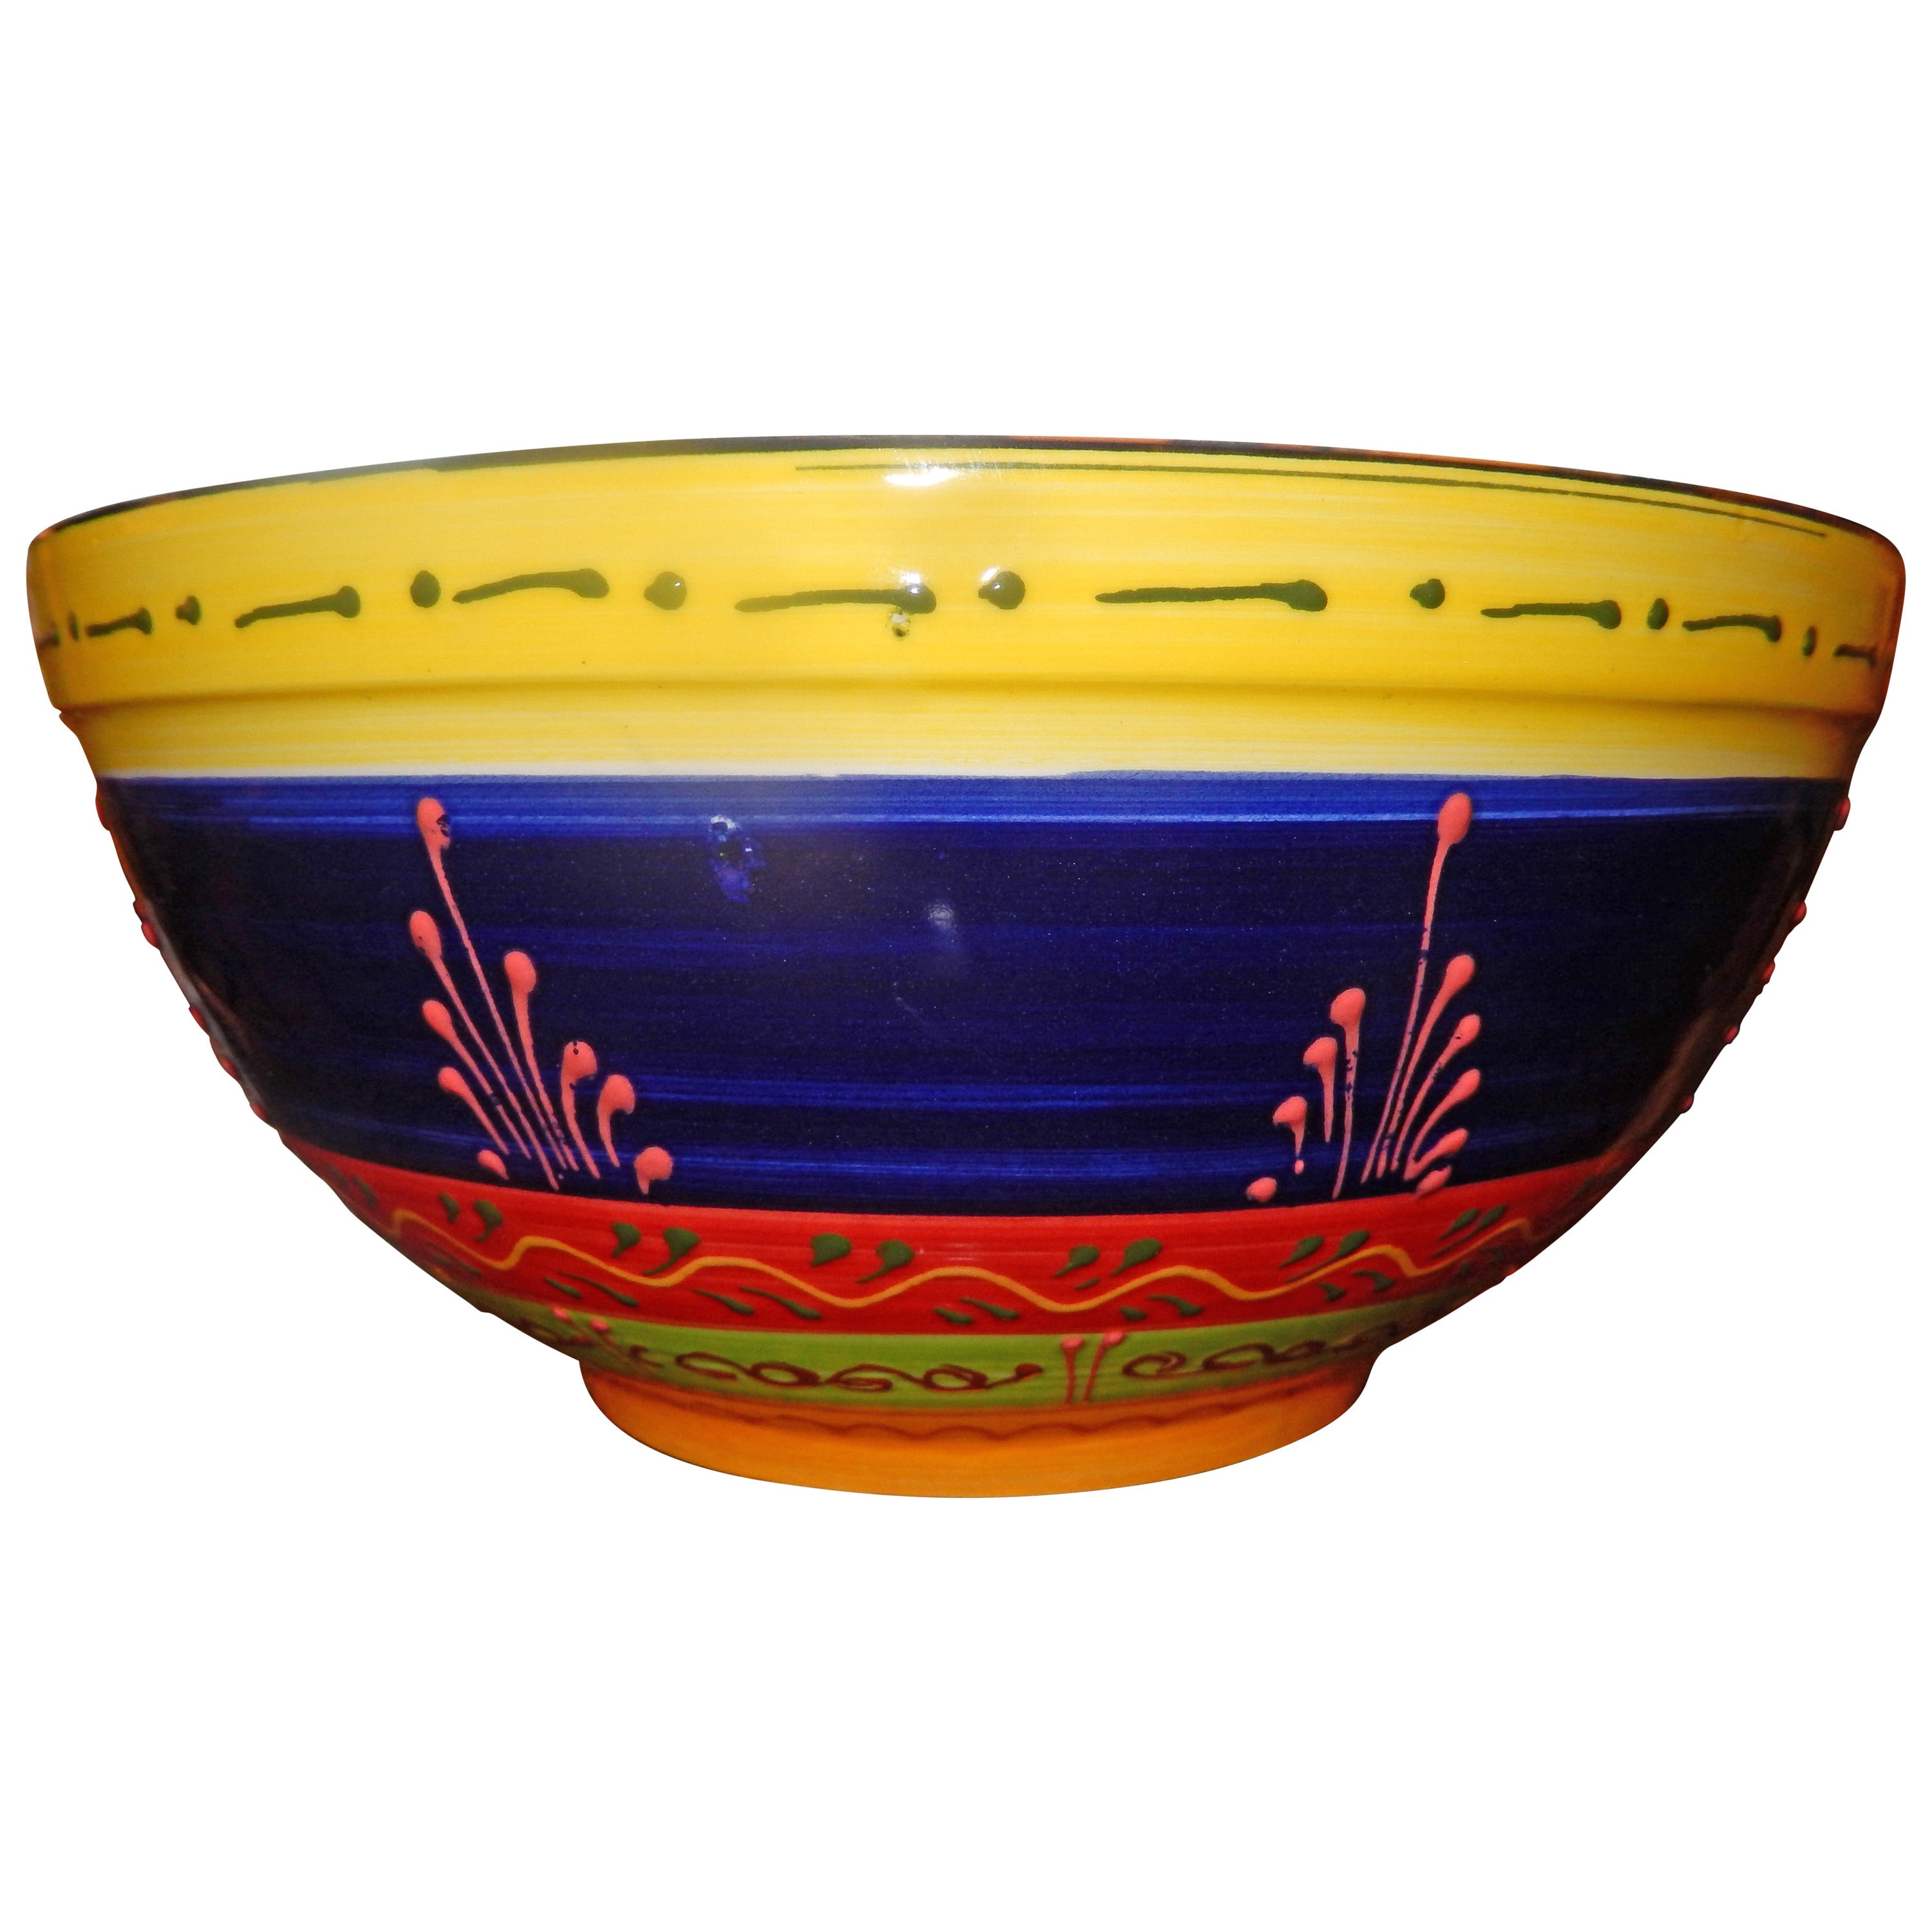 Studio Crafted Ceramic Colorful Bowl from Cordoba Spain